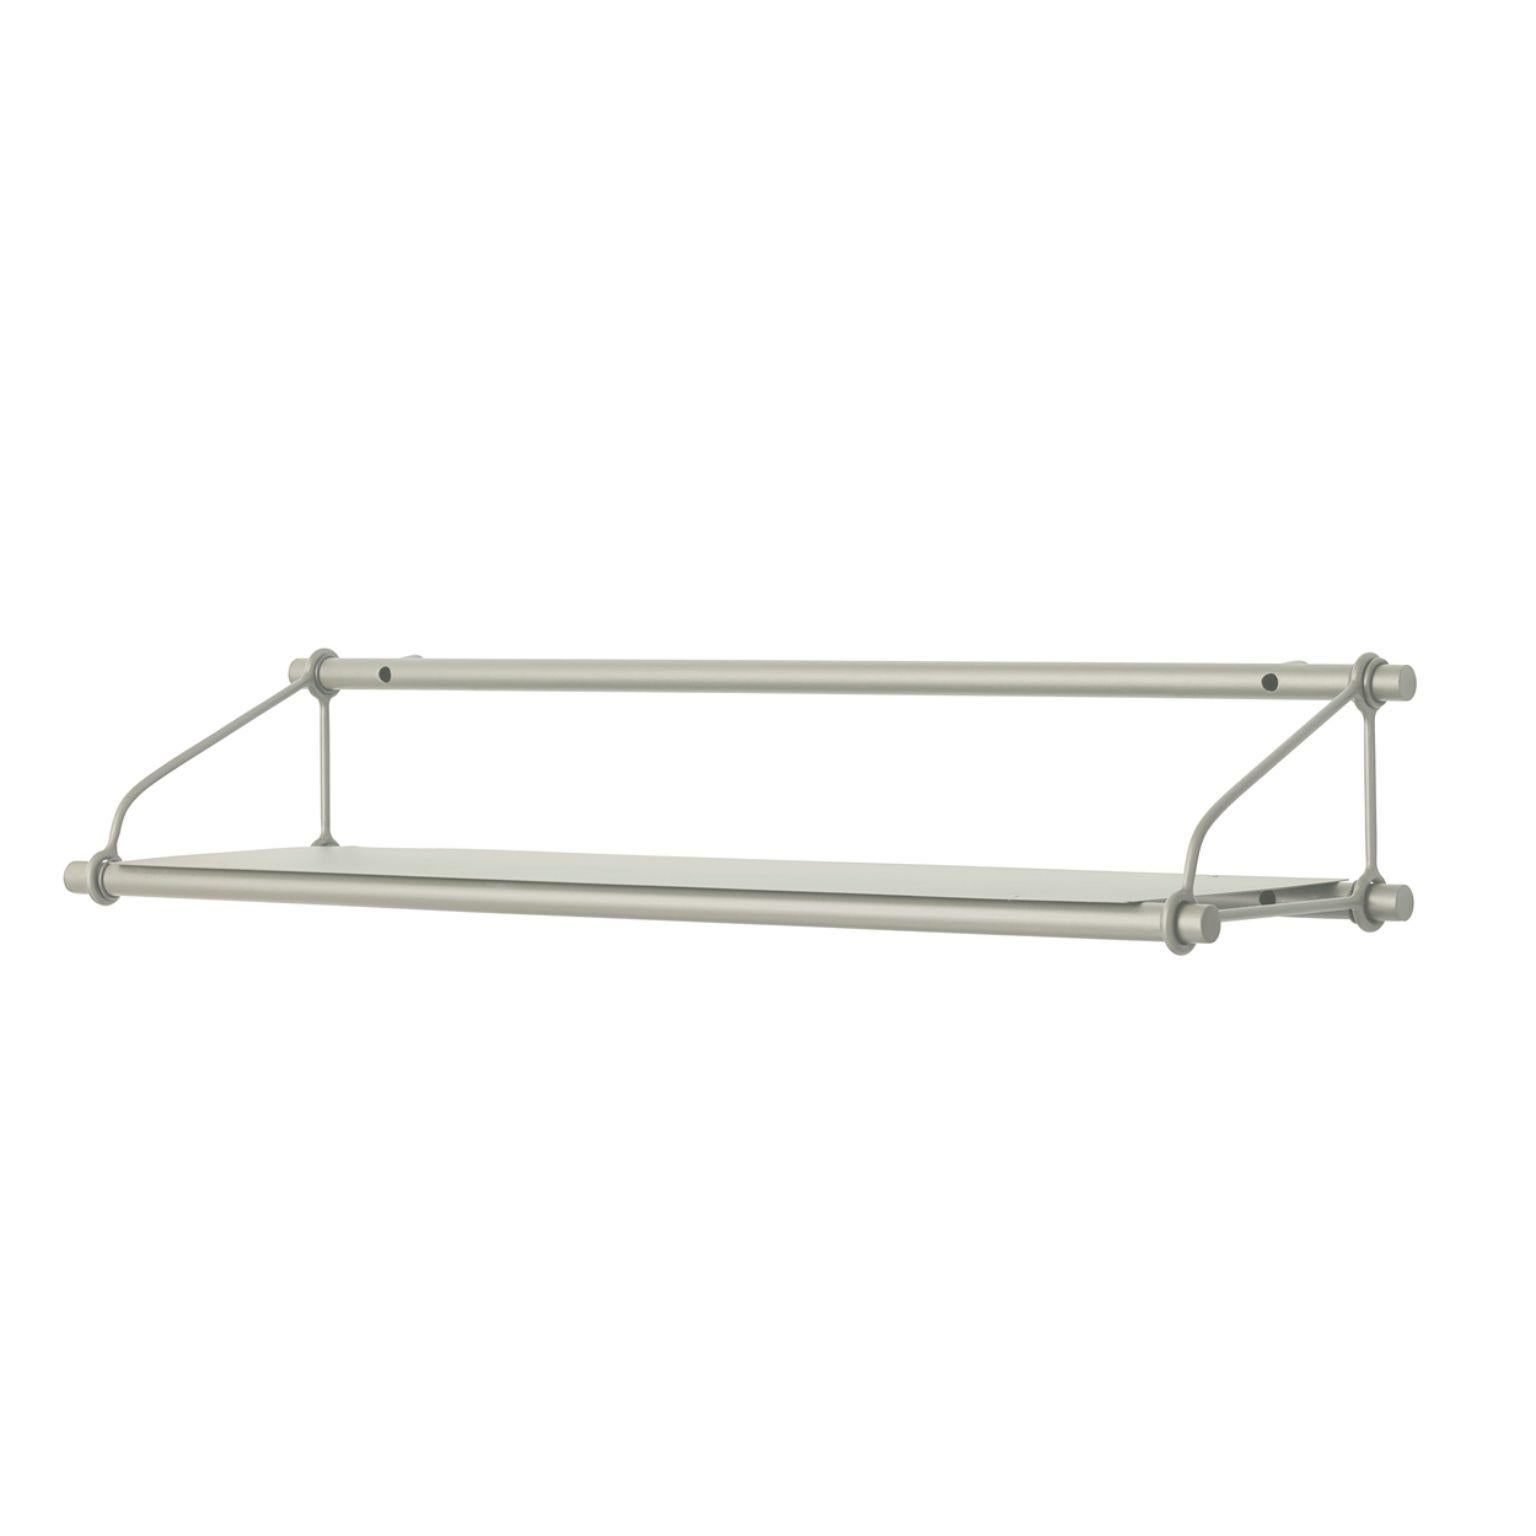 Parade 1 shelf Top Warm White by Warm Nordic
Dimensions: D100 x W30 x H19cm
Material: Powder coated steel
Weight: 4 kg
Also available in different colors and dimensions. 

Elegant metal shelving unit with plenty of space for all your favourite